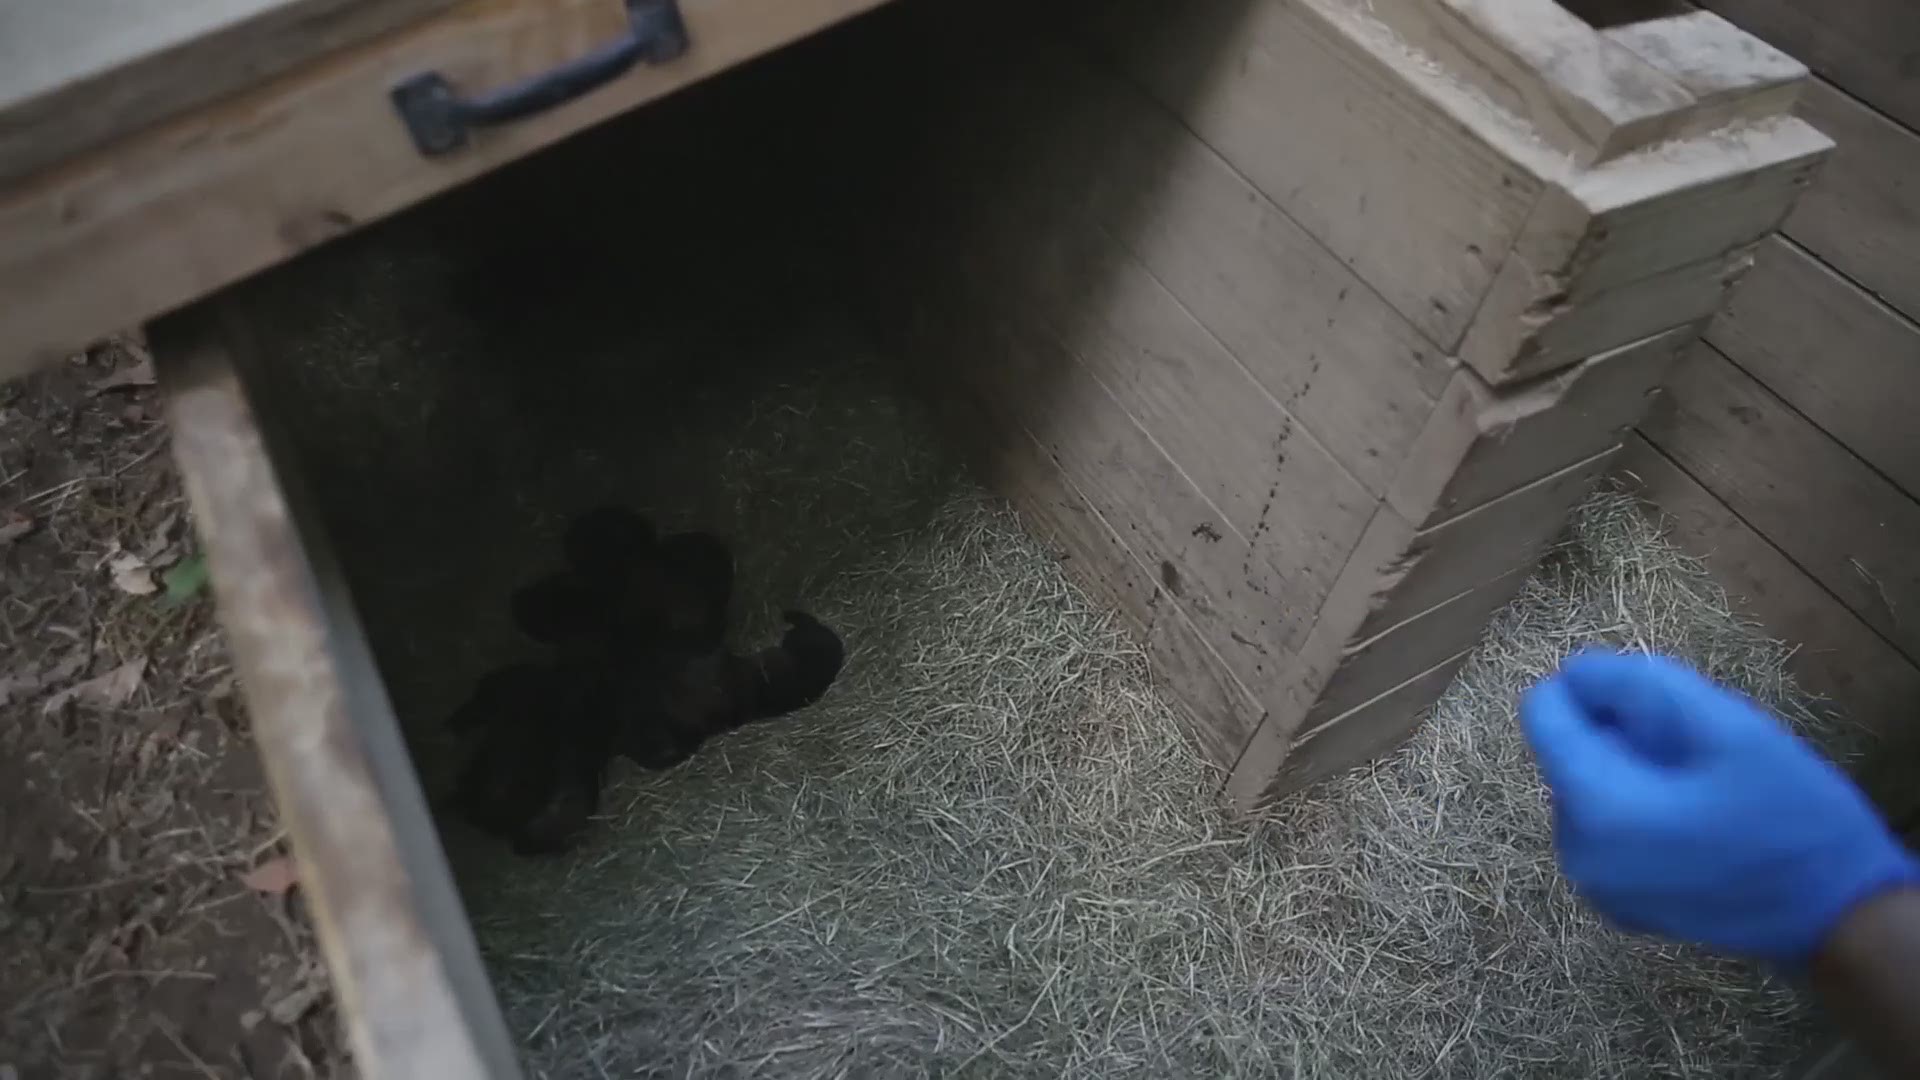 In this video provided by Zoo Knoxville, keepers check up on eight newborn red wolf pups, which are a critically endangered species.